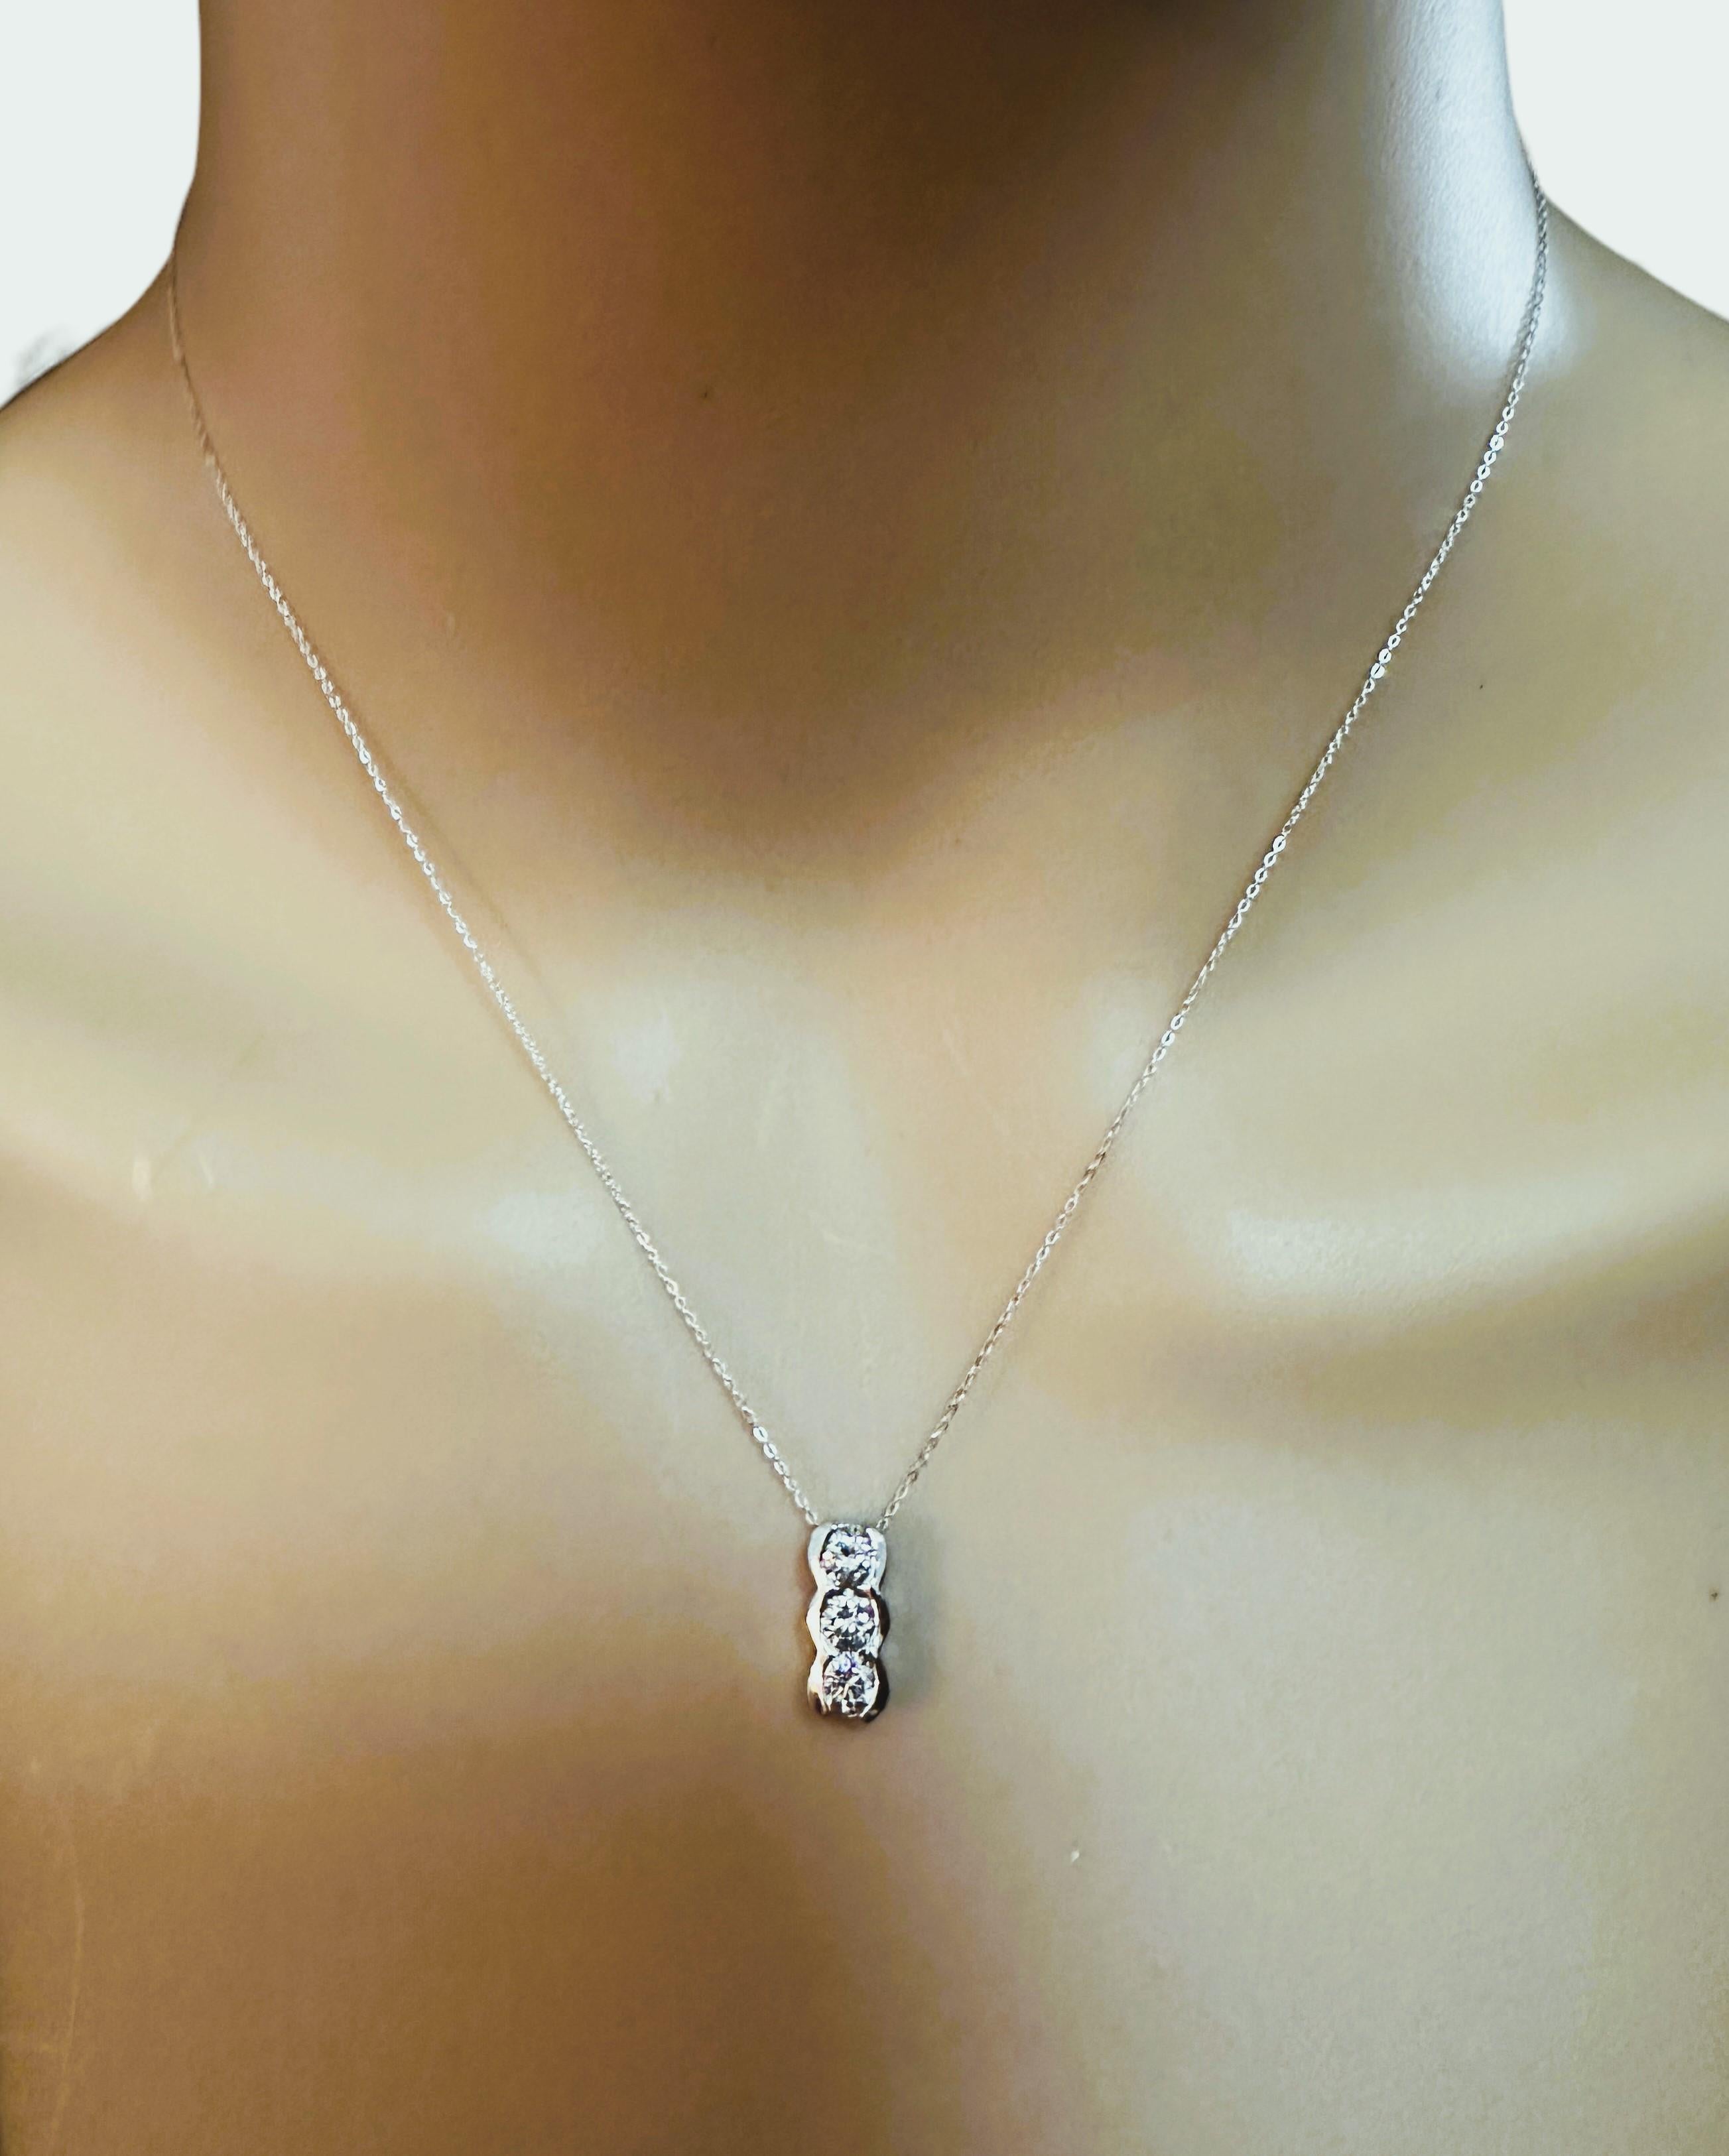 Art Deco Italian Modern 14k White Gold 3-Stone .5 ct Diamond Necklace with Appraisal For Sale